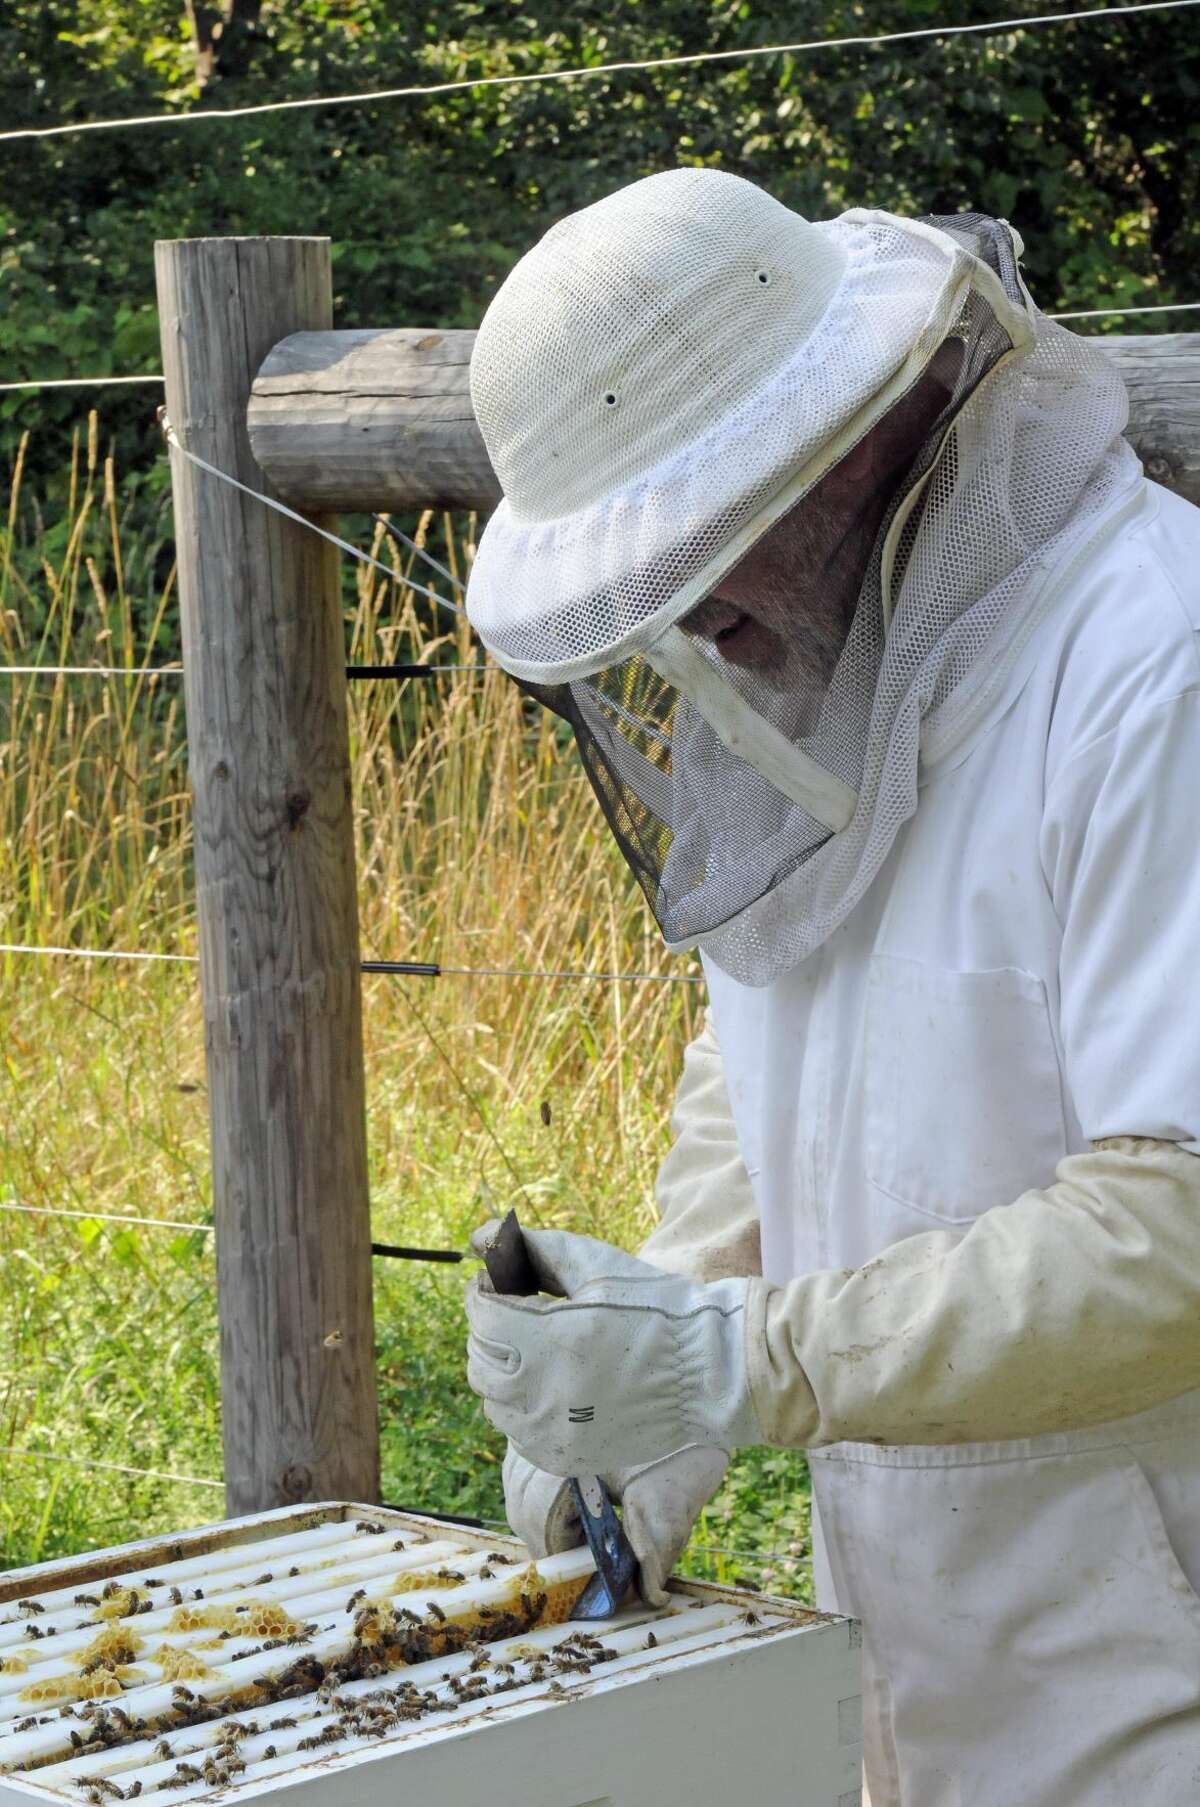 Beekeeper William Ahrens attends to one of his hives.